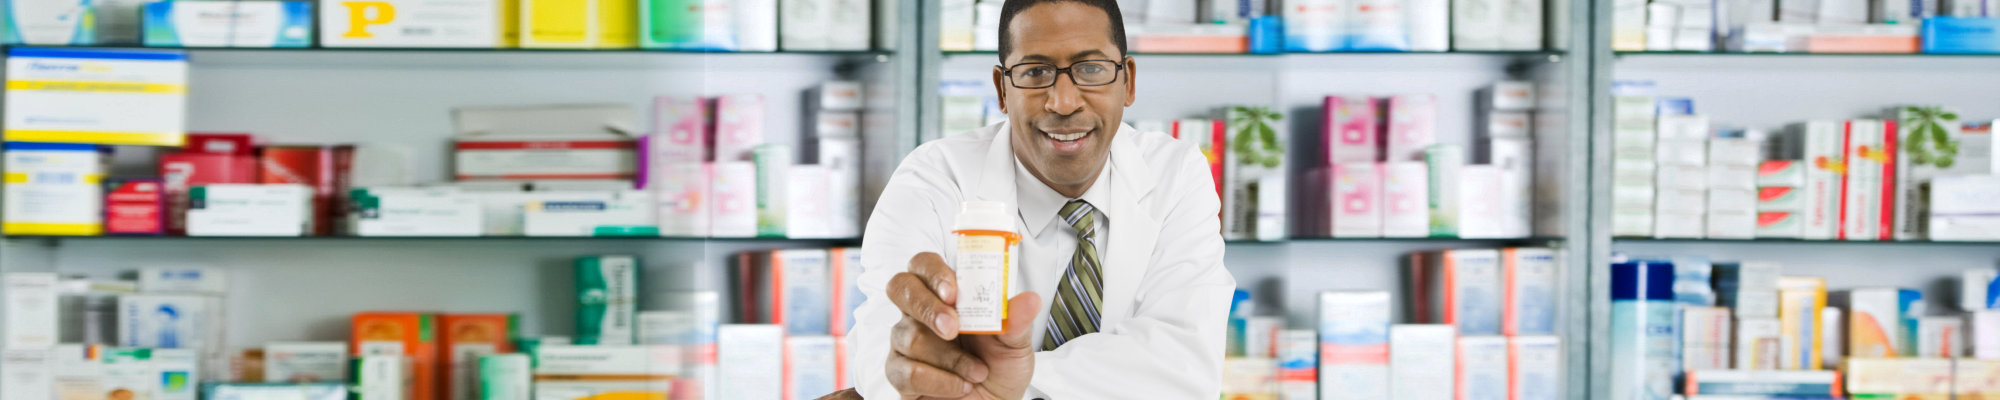 Portrait of a Male pharmacist showing pills